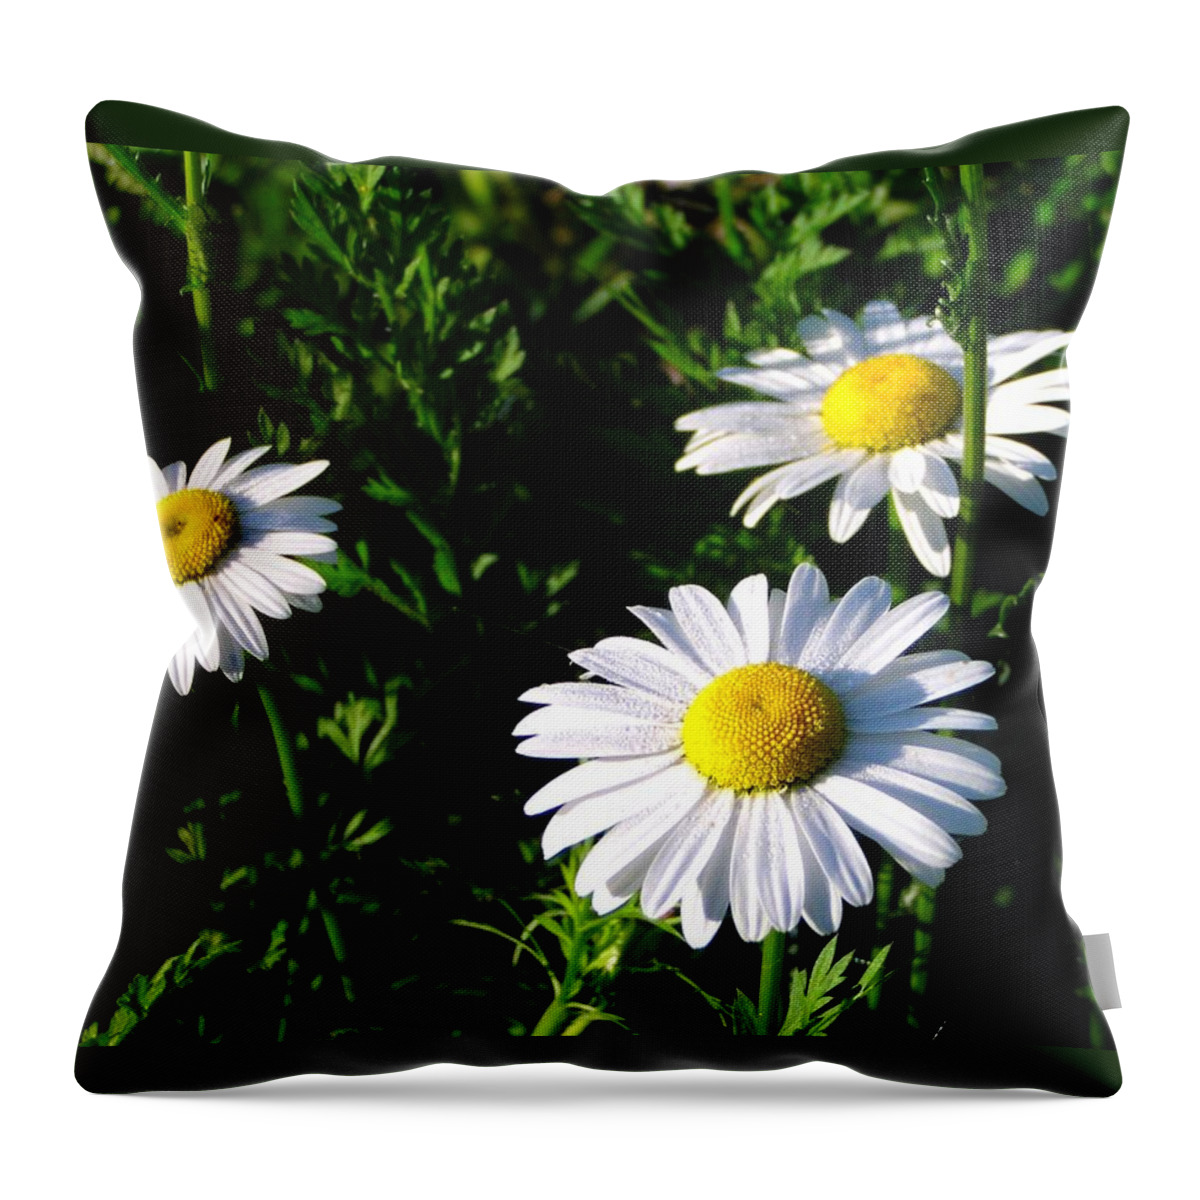 Daisy Throw Pillow featuring the photograph Margeritaville by Gigi Dequanne